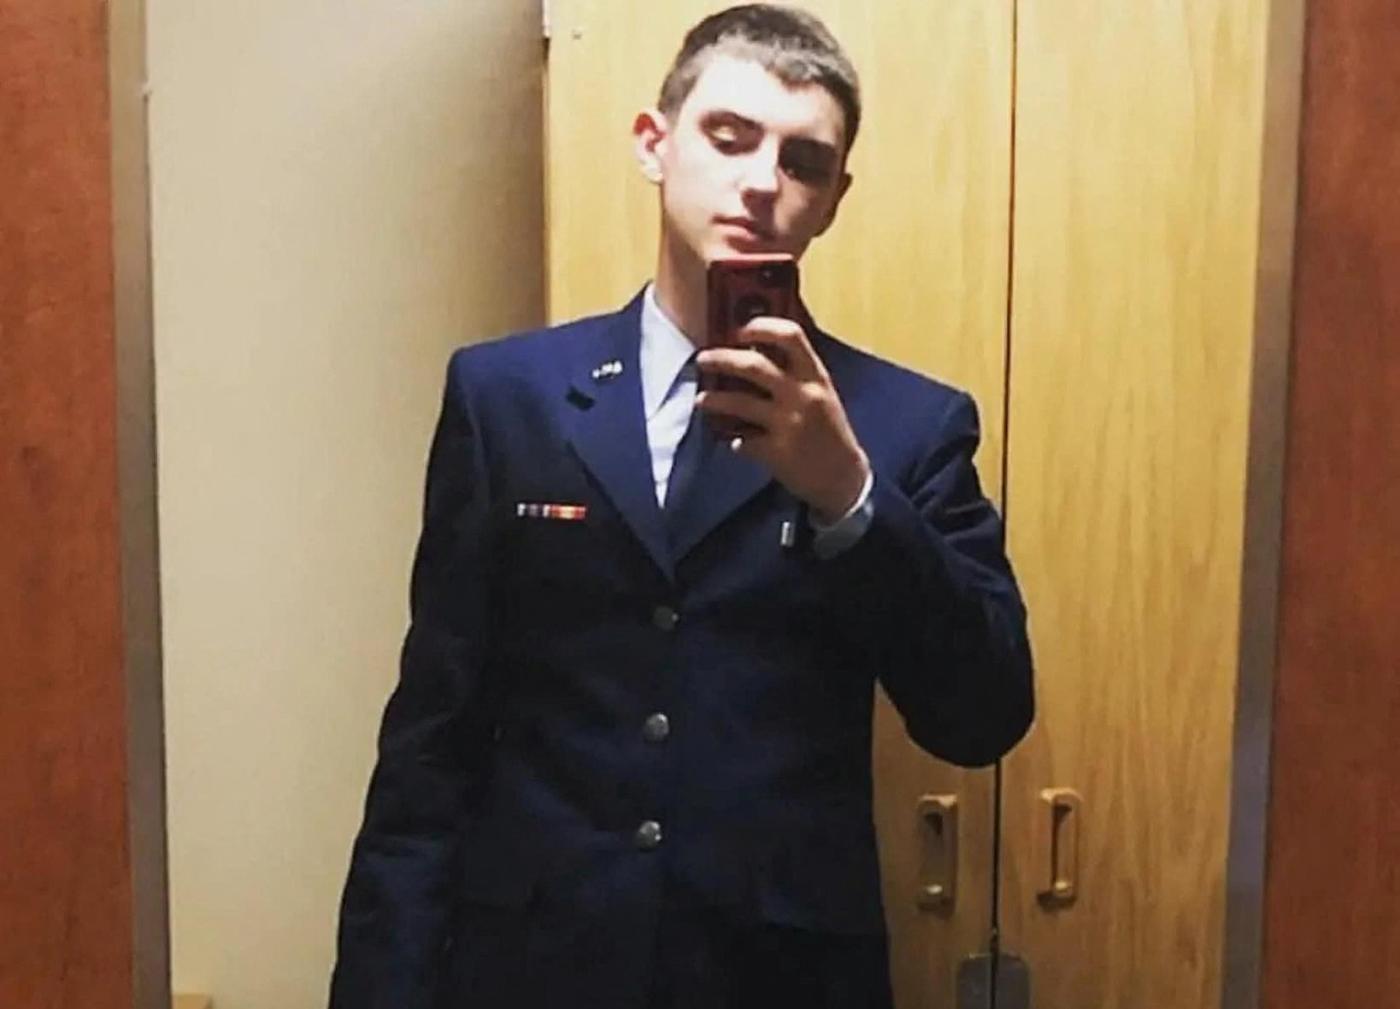 An undated picture shows Jack Douglas Teixeira, a 21-year-old member of the U.S. Air National Guard, who was arrested by the FBI, over his alleged involvement in leaks online of classified documents, posing for a selfie at an unidentified location. 